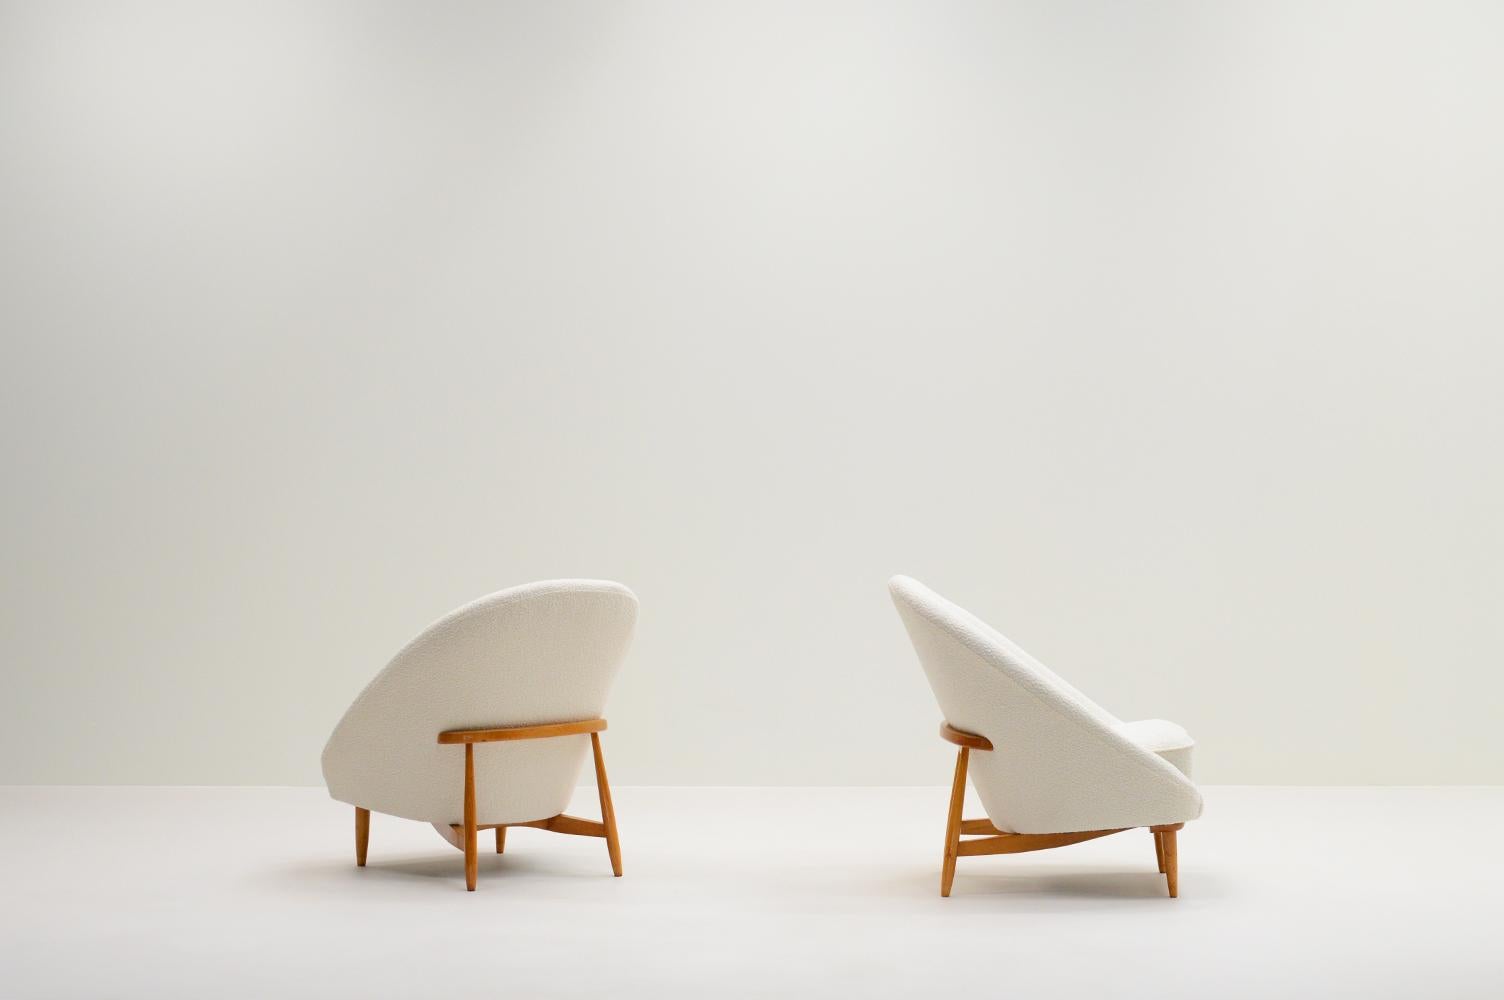 Set of 2 model 115 chairs by Theo Ruth for Artifort, 1950s the Netherlands. This set was made in 1957 and has the original wooden frame, later Artifort also made a version with a metal frame. Theo Ruth (1915- 1971) was one of the pioneer designers